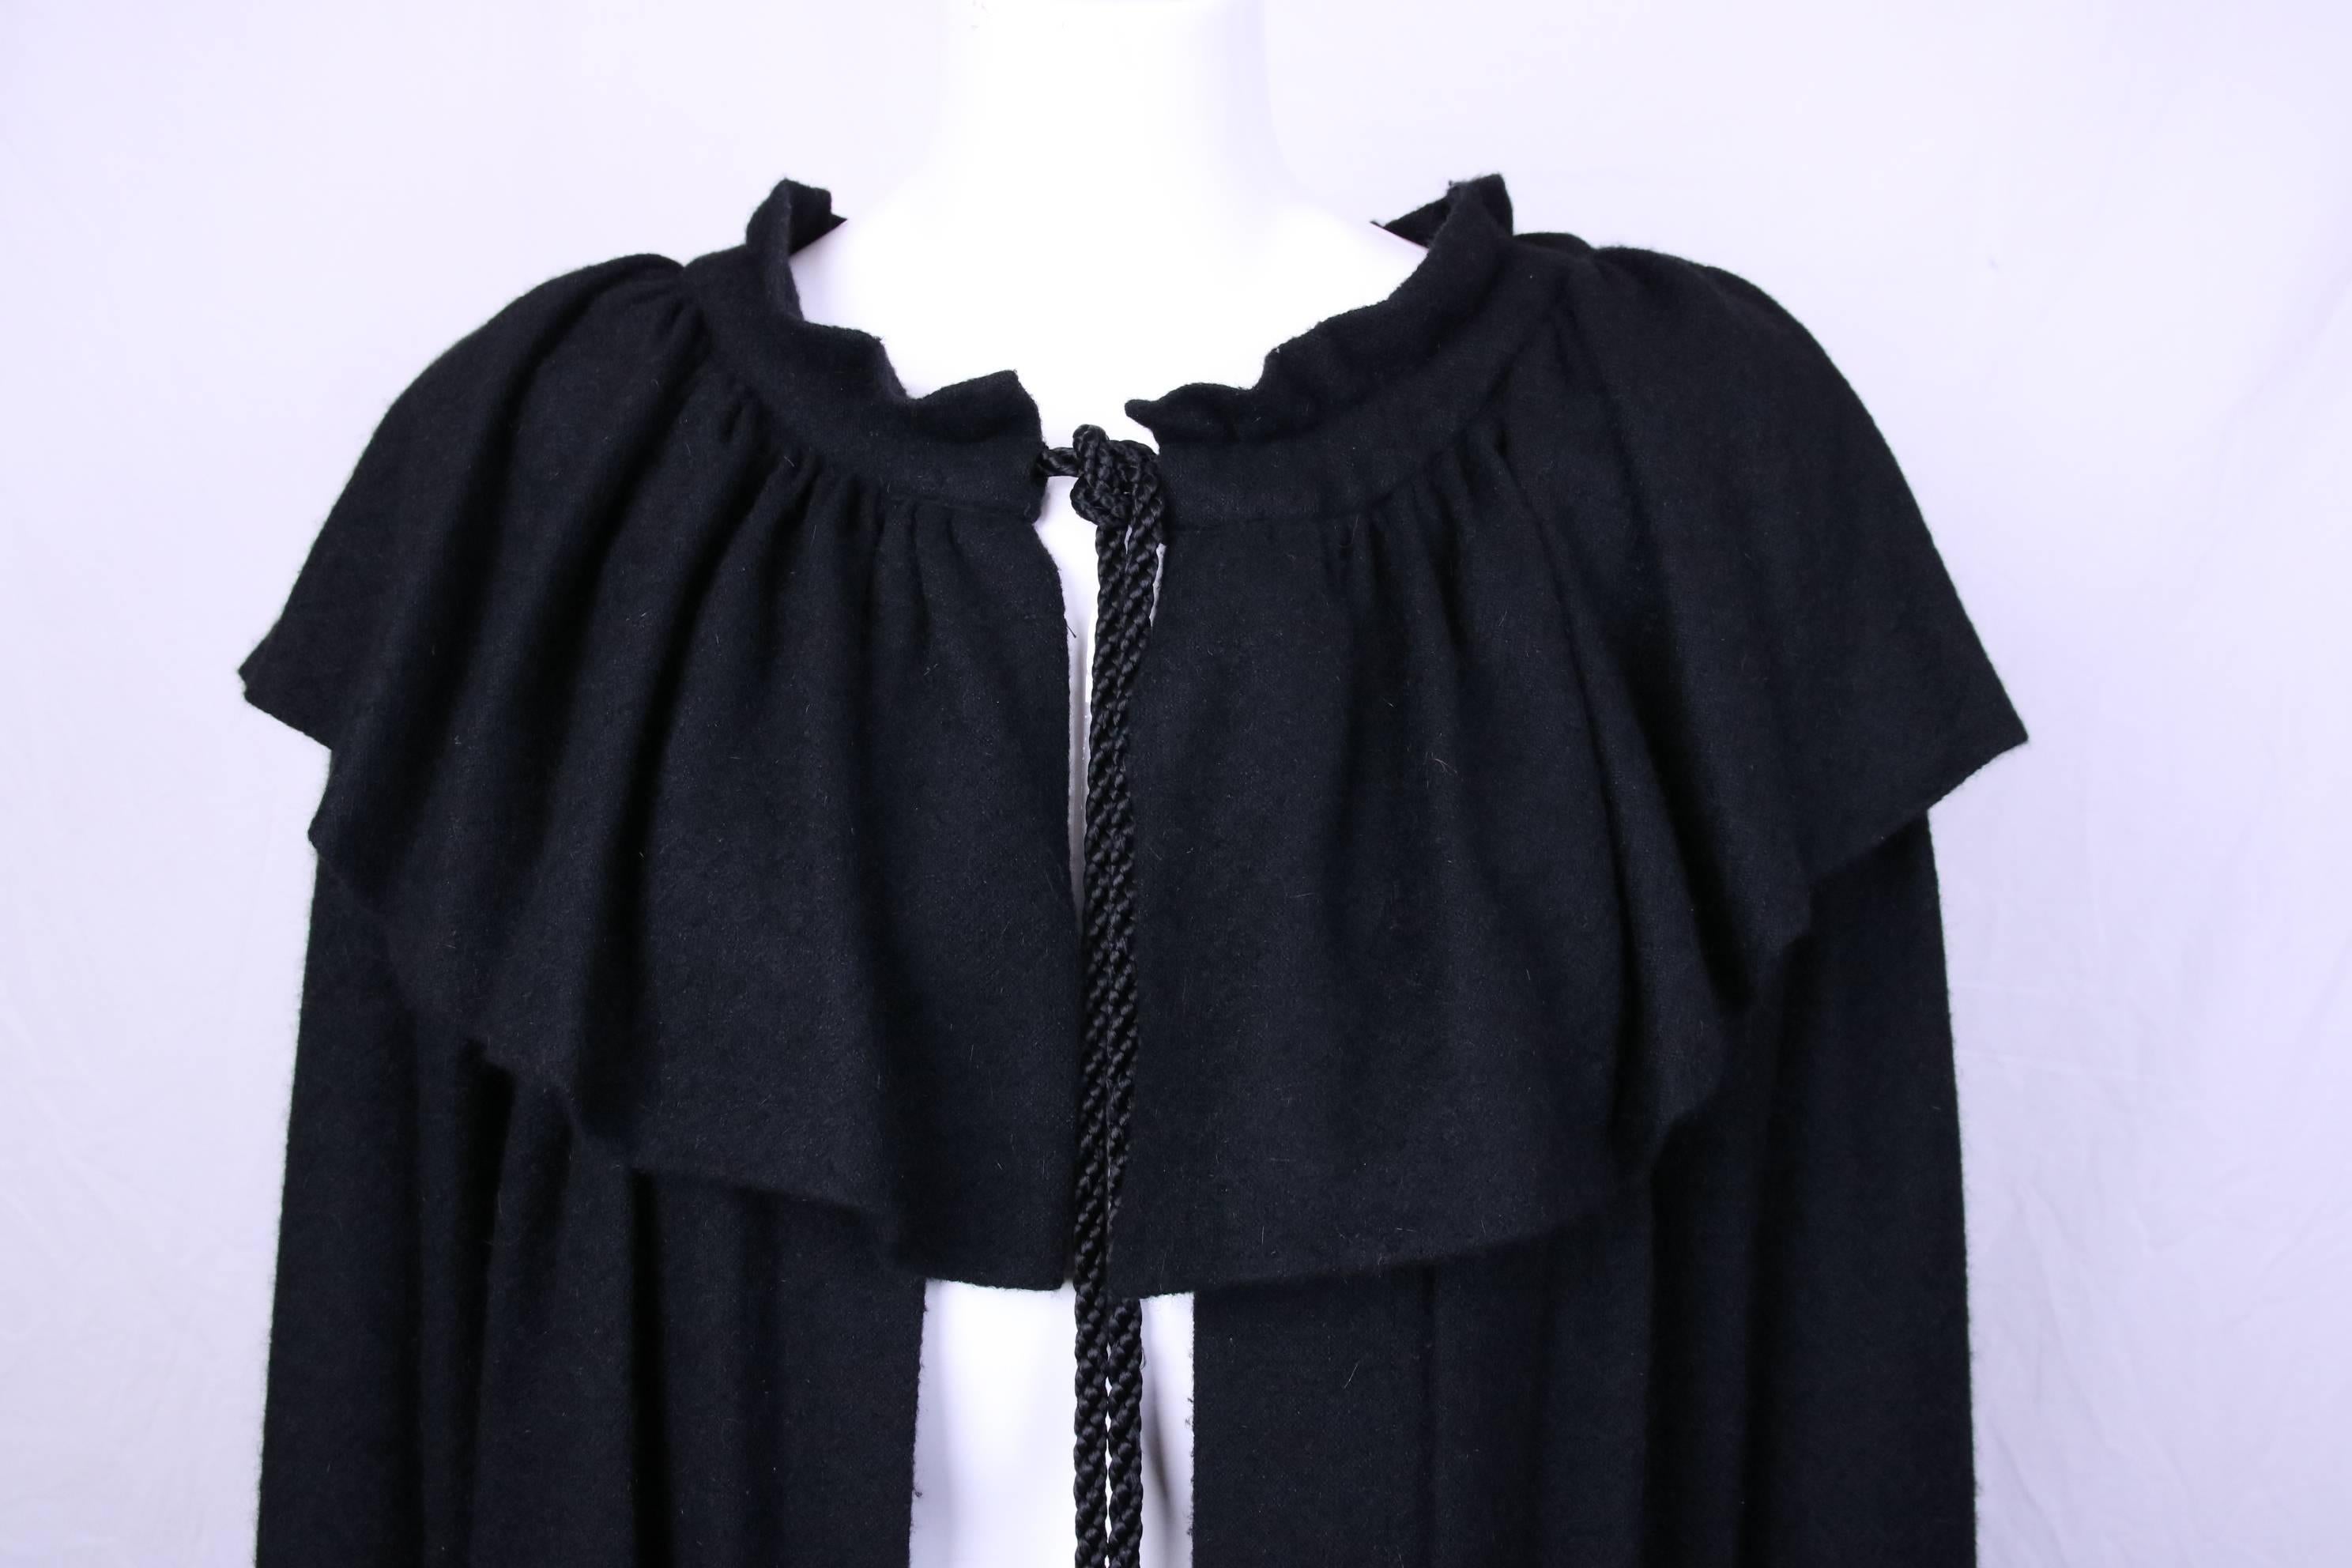 1970s Yves Saint Laurent black wool cape with ruffle collar and silk cord neck tie terminating in silk tassels. In excellent condition. There is no size tag - the cape most likely will fit most sizes from 4-10.
MEASUREMENTS:
Length - (approx.) 51